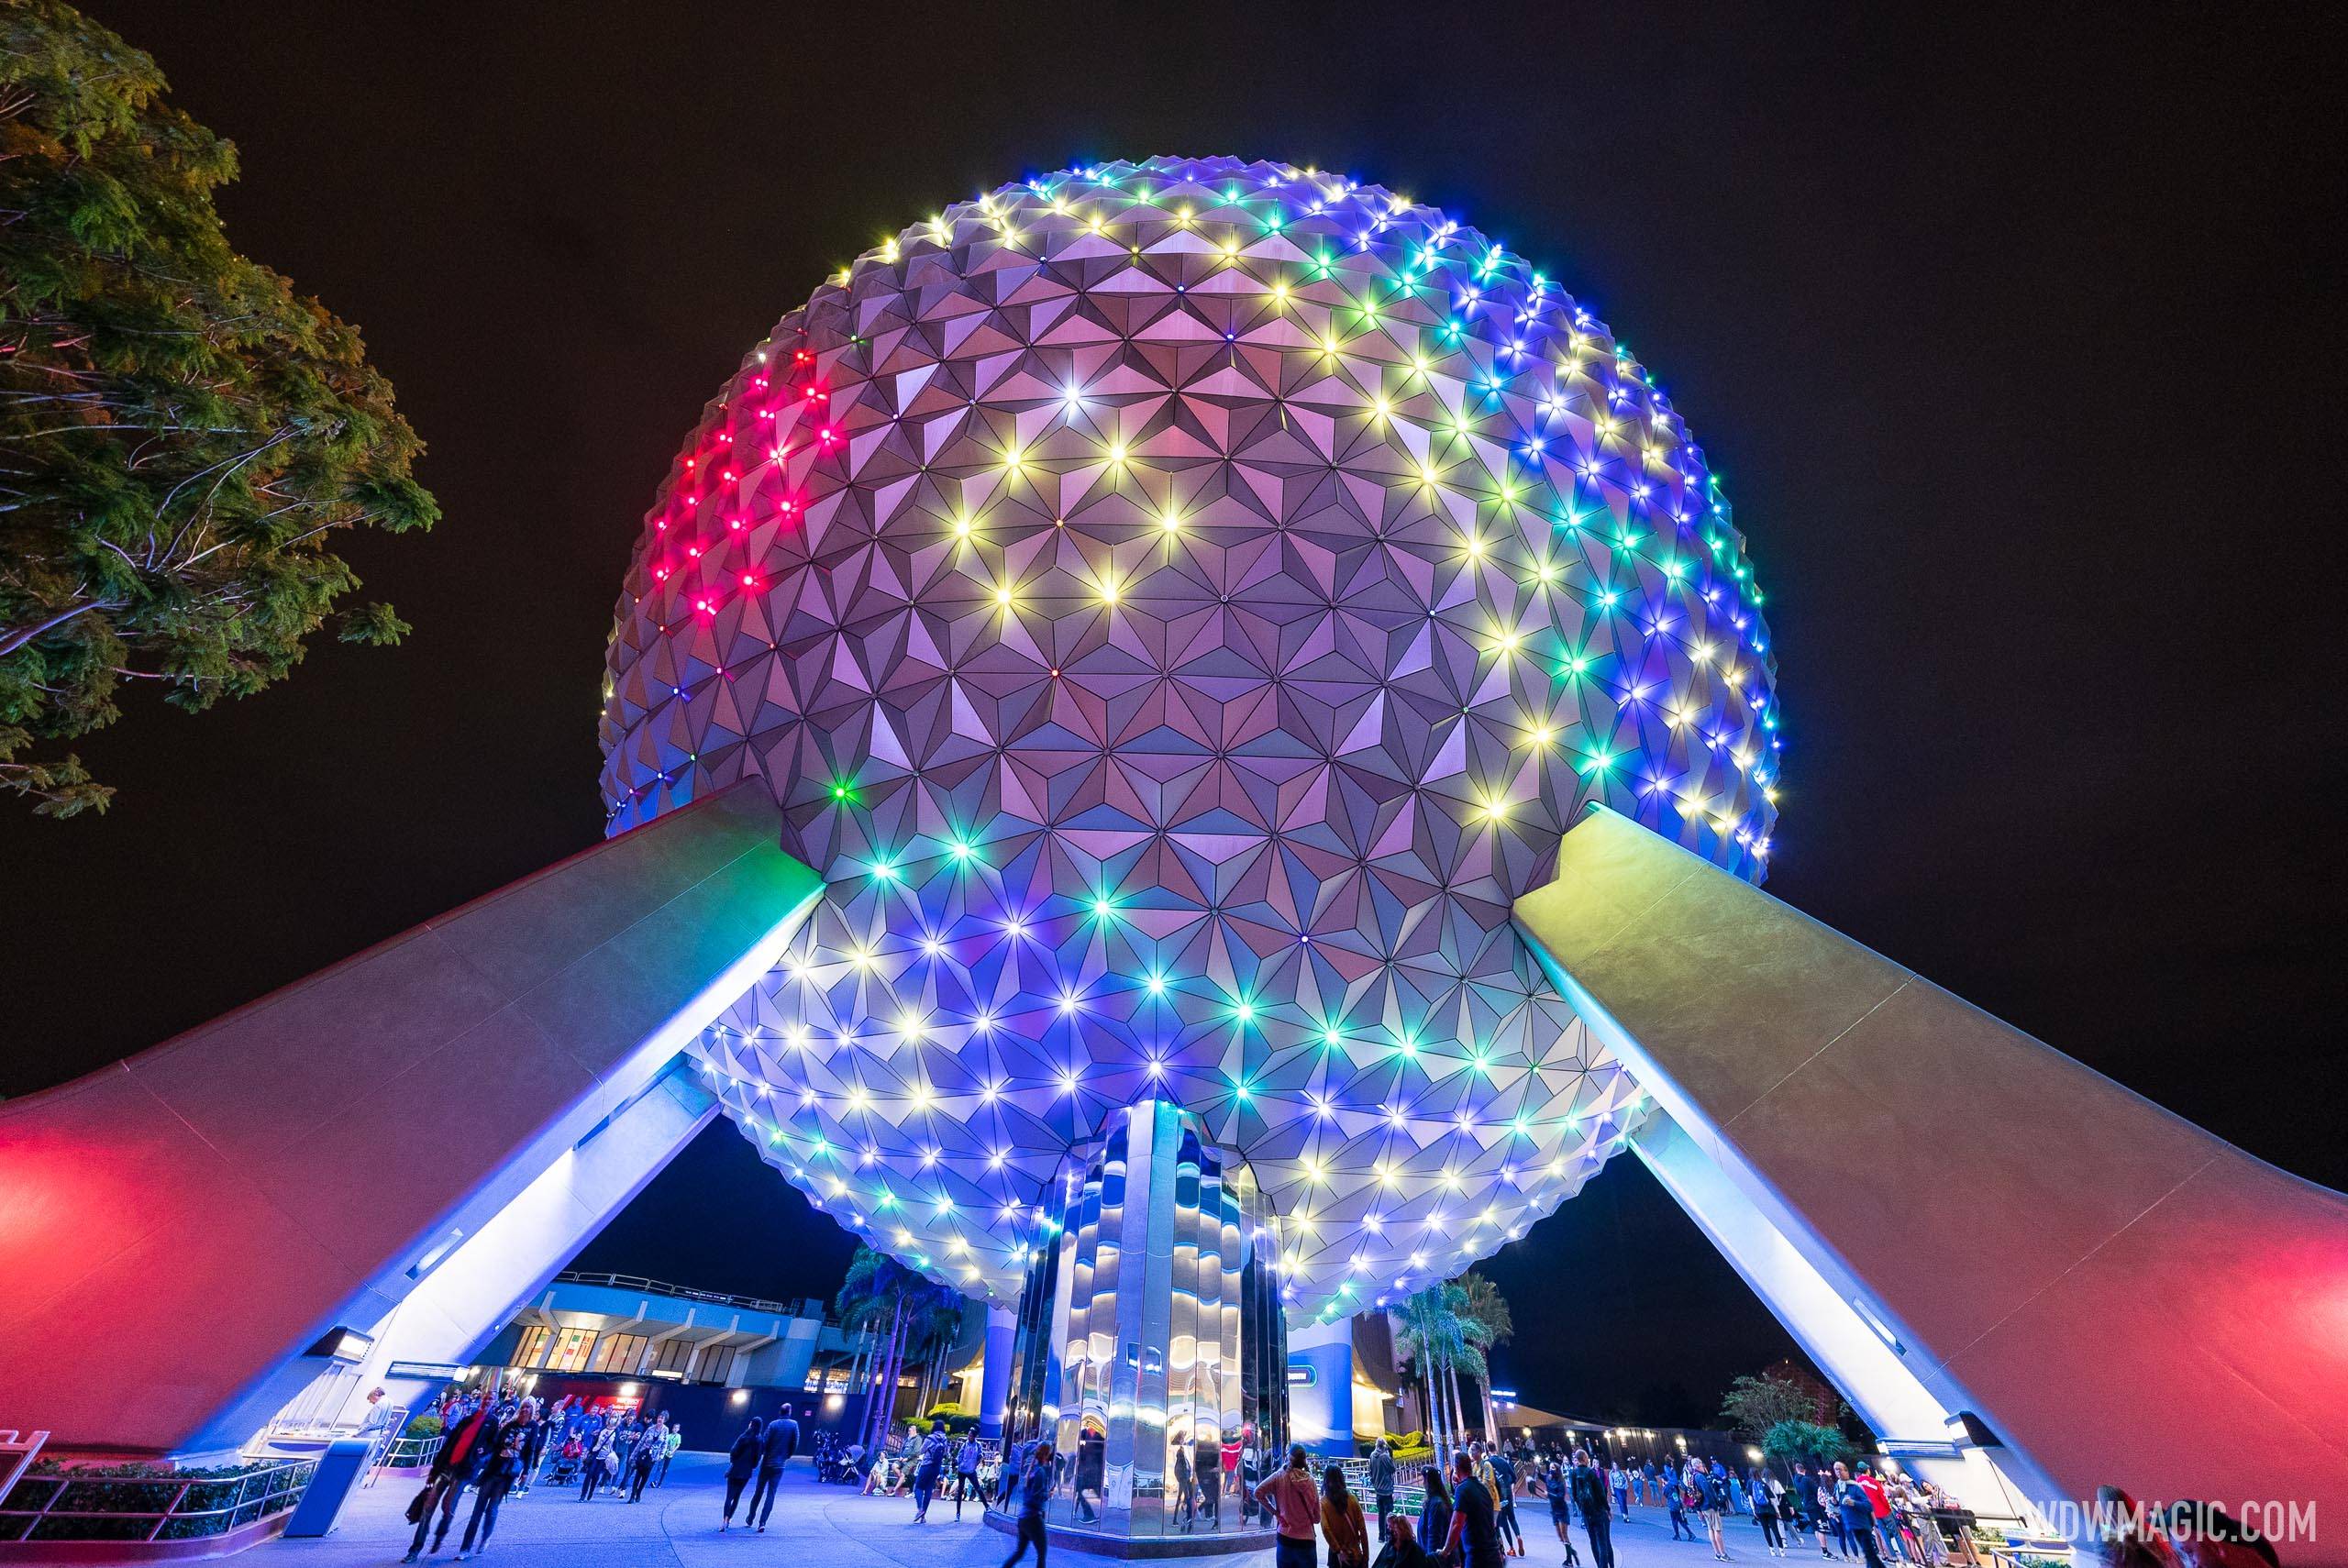 The Lights of Winter pattern on Spaceship Earth